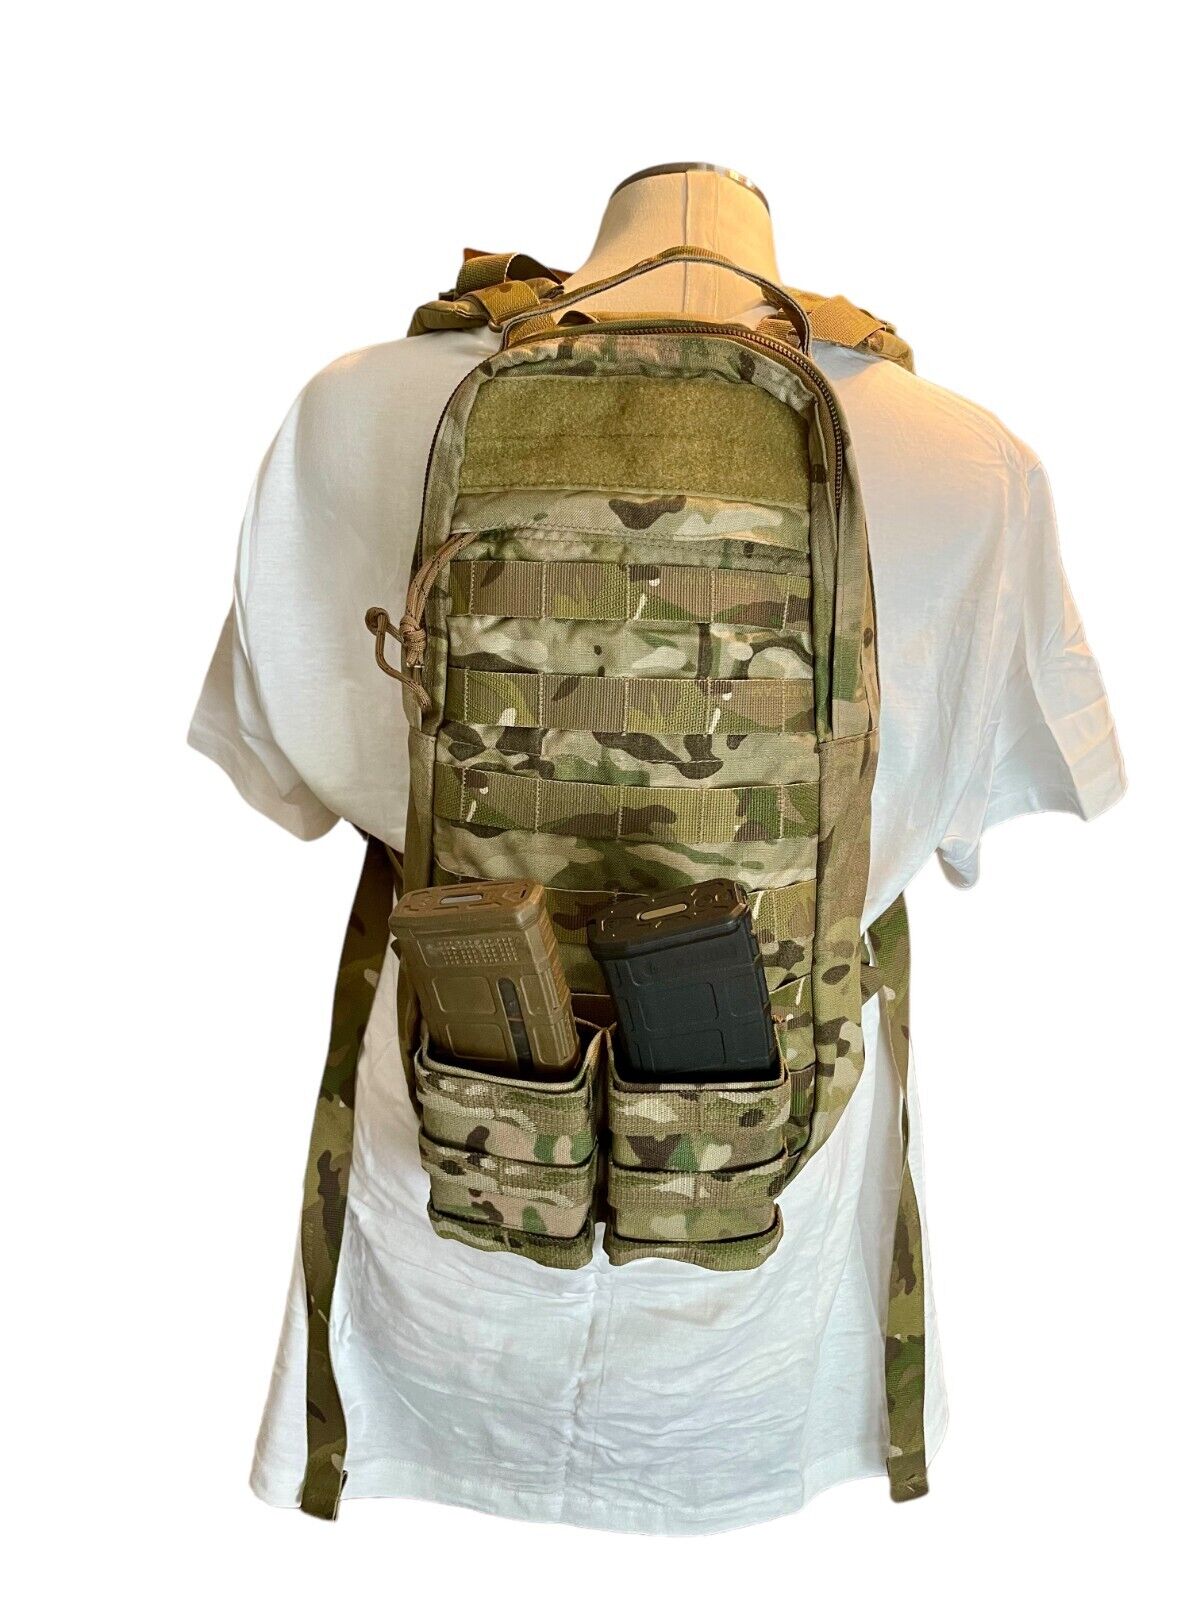 Eagle Tactical MultiCam Hydration Carrying Bag HCB-100OZ-MS-5CCA w/ Pouches